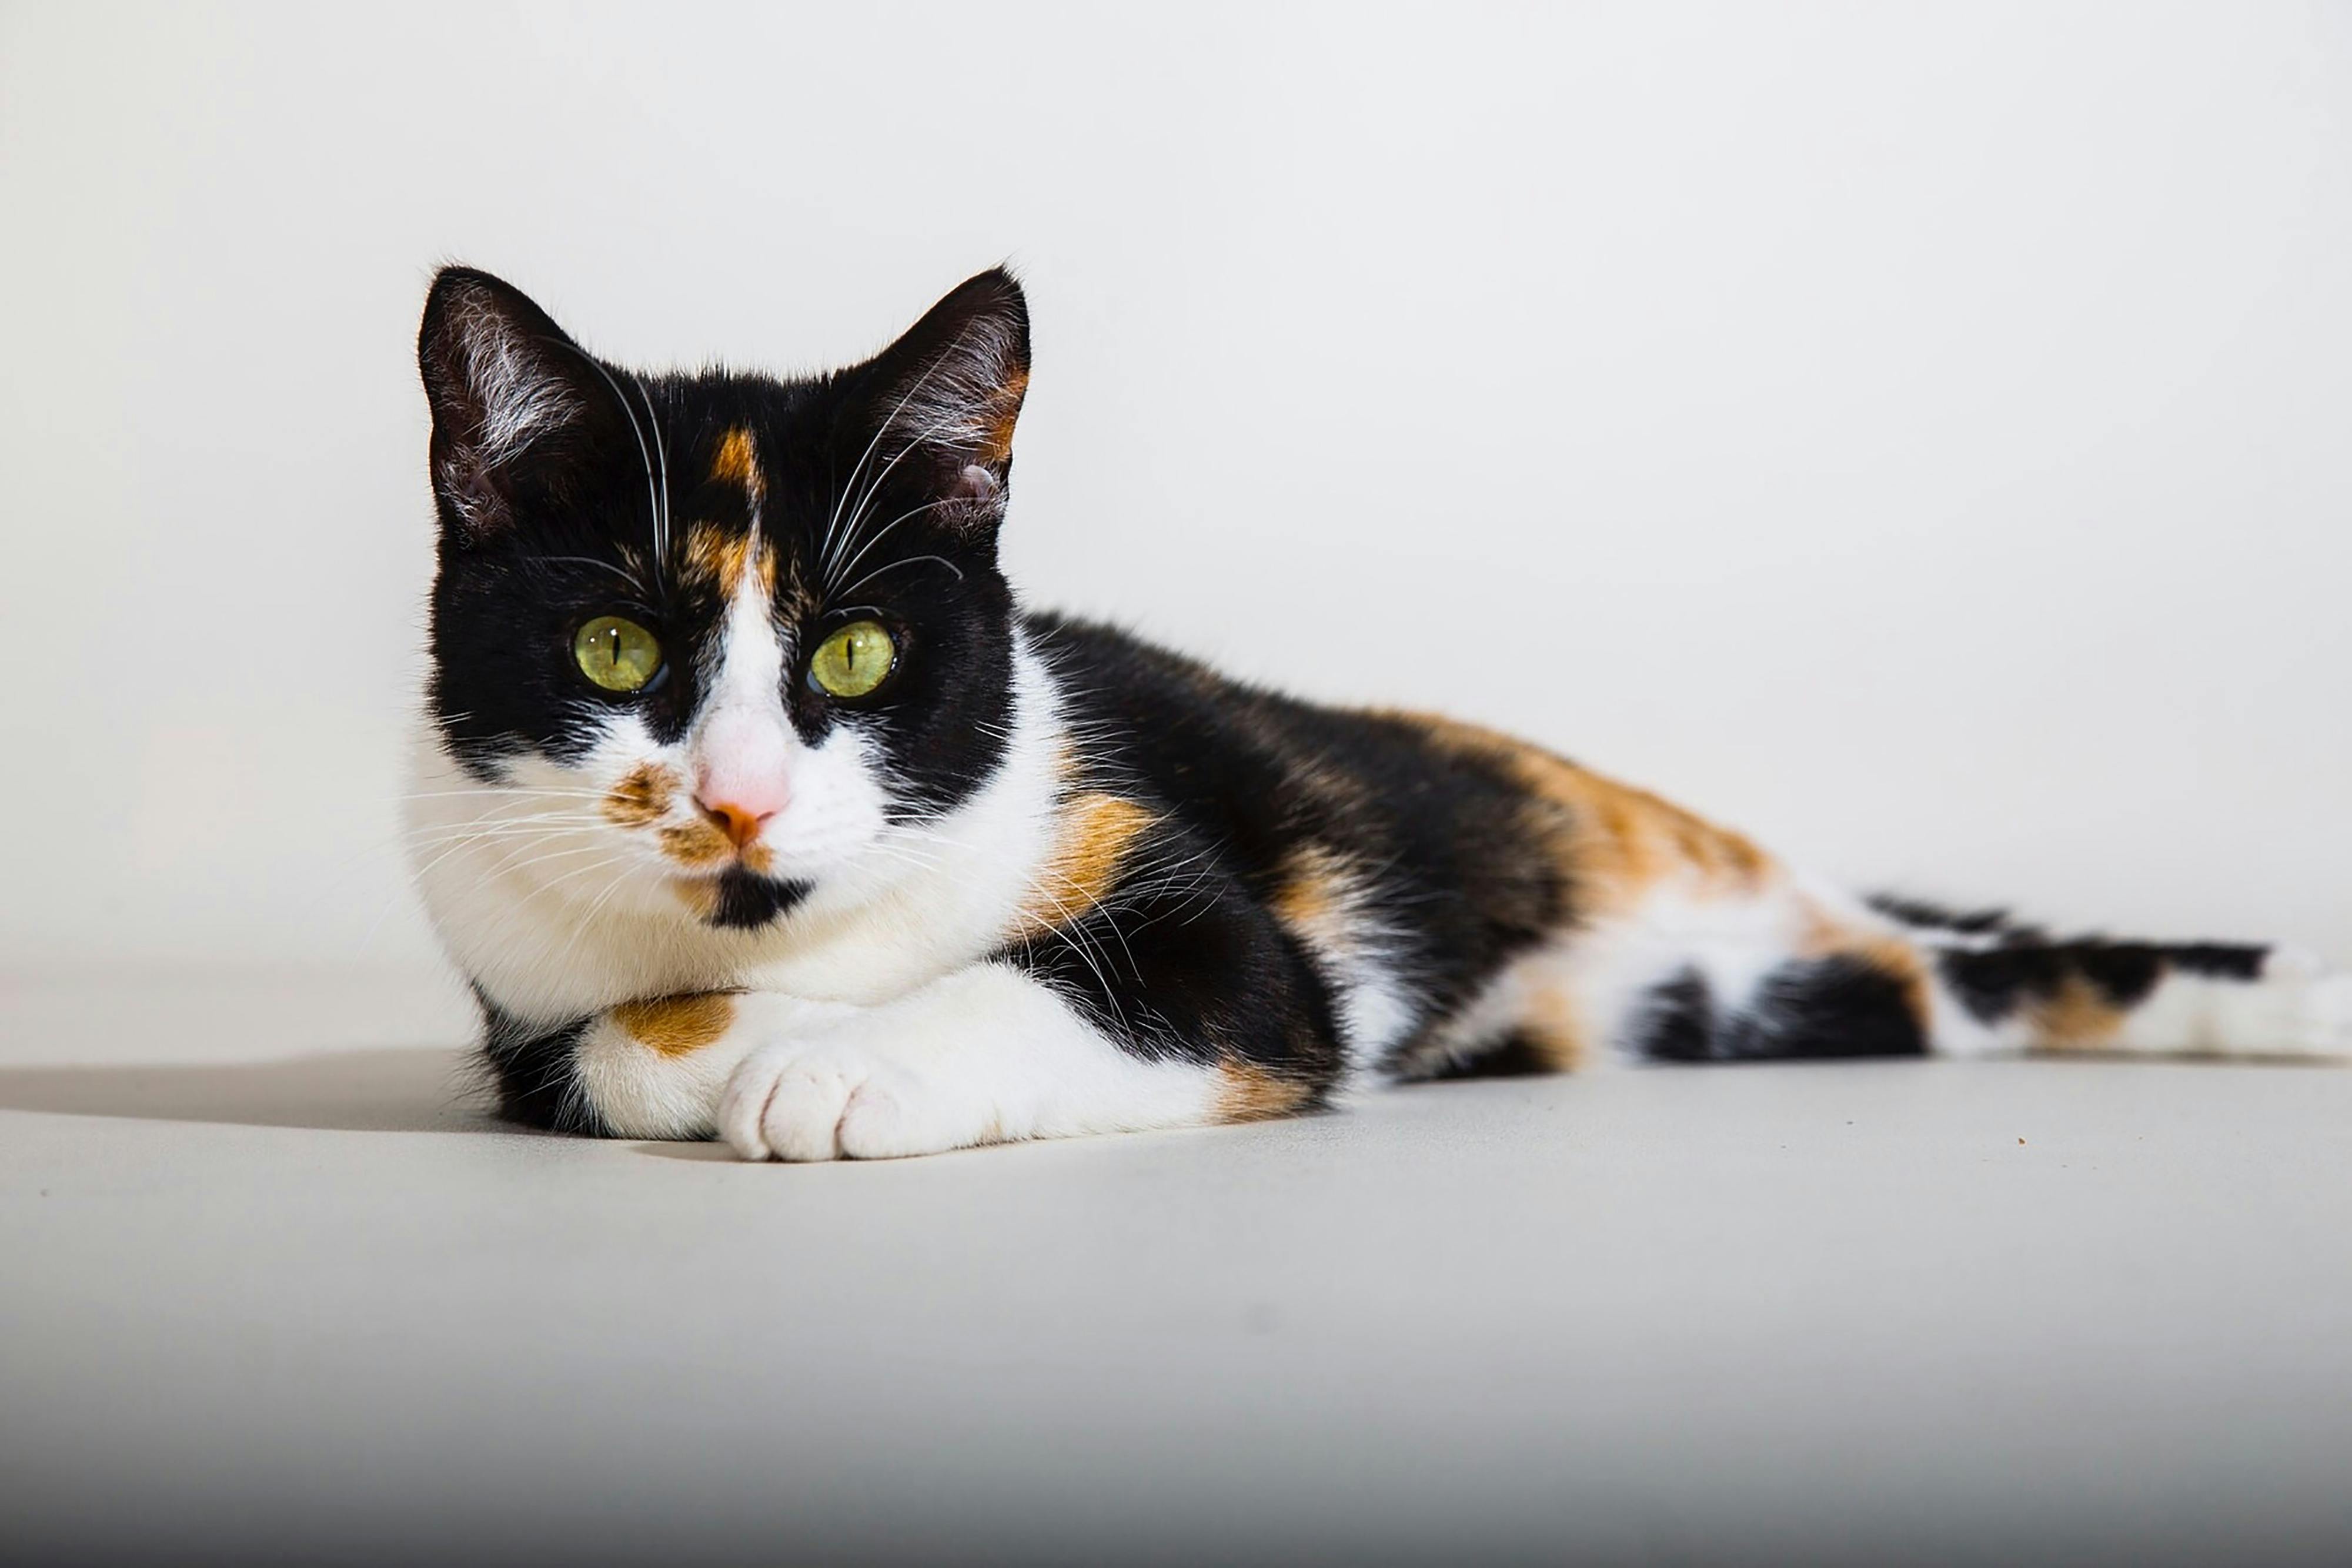 Calico cat with green eyes looking at the camera